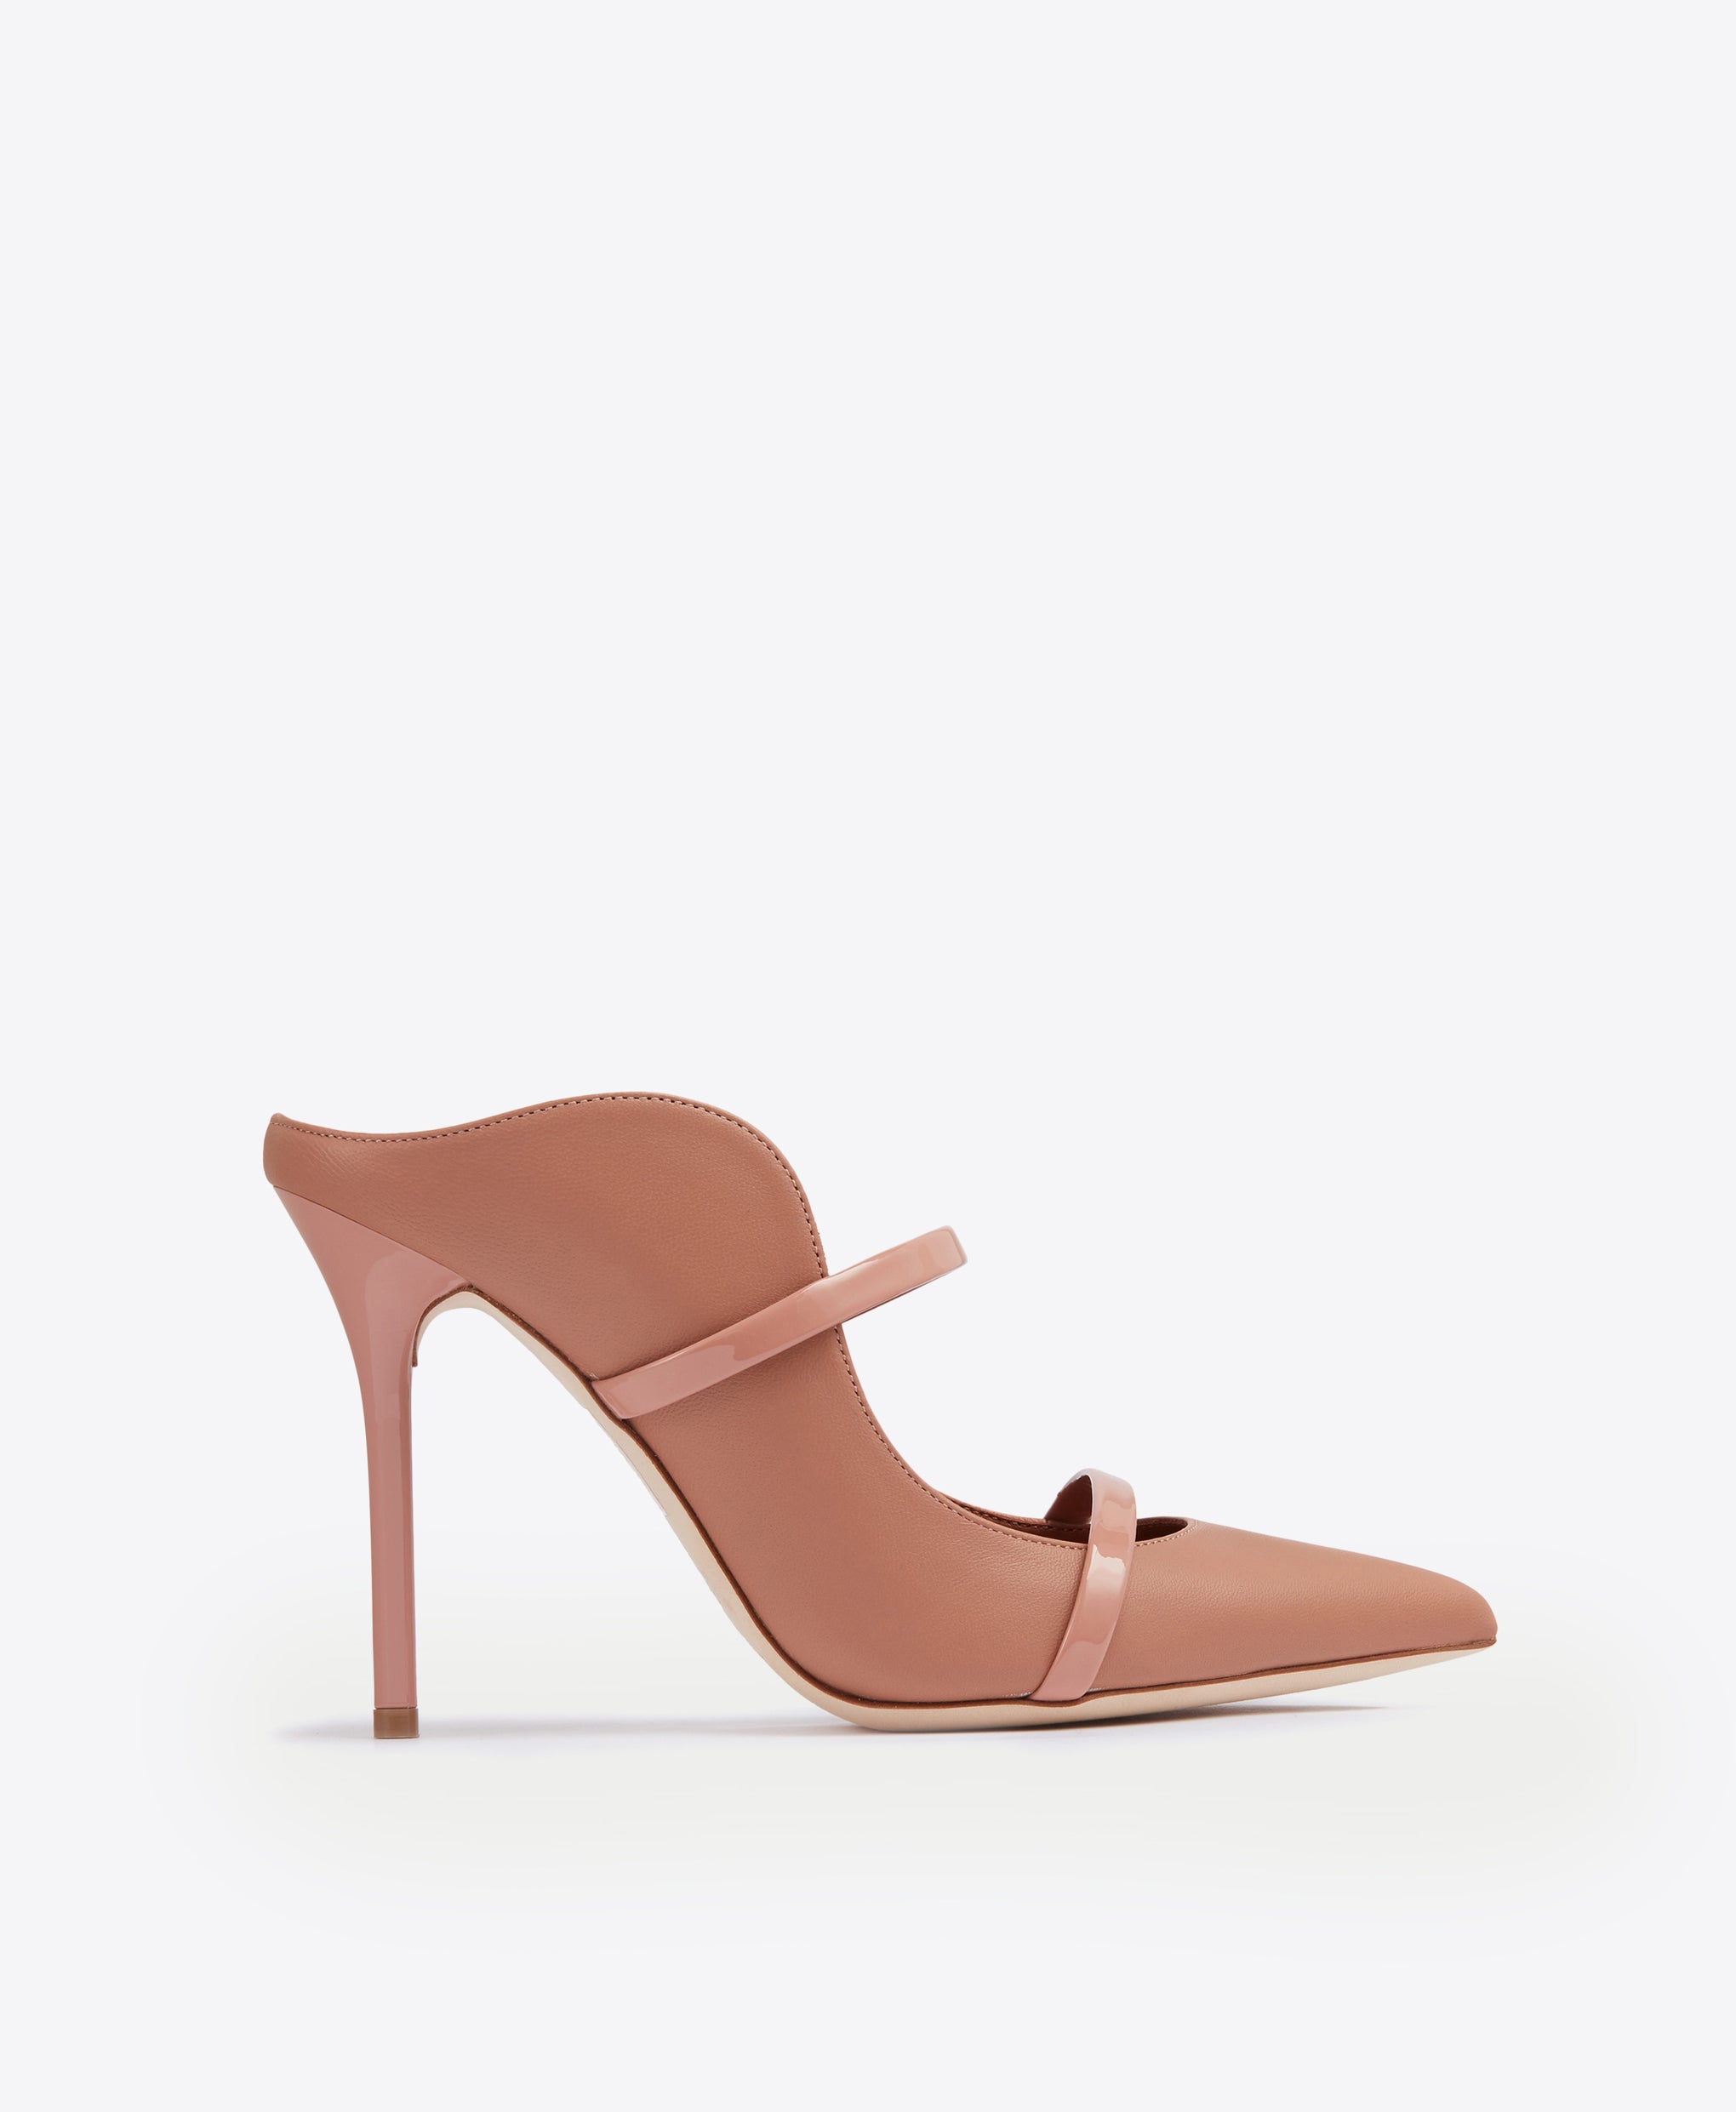 Women's Nude And Blush Pink Leather Designer Pointed Toe Mules Malone Souliers